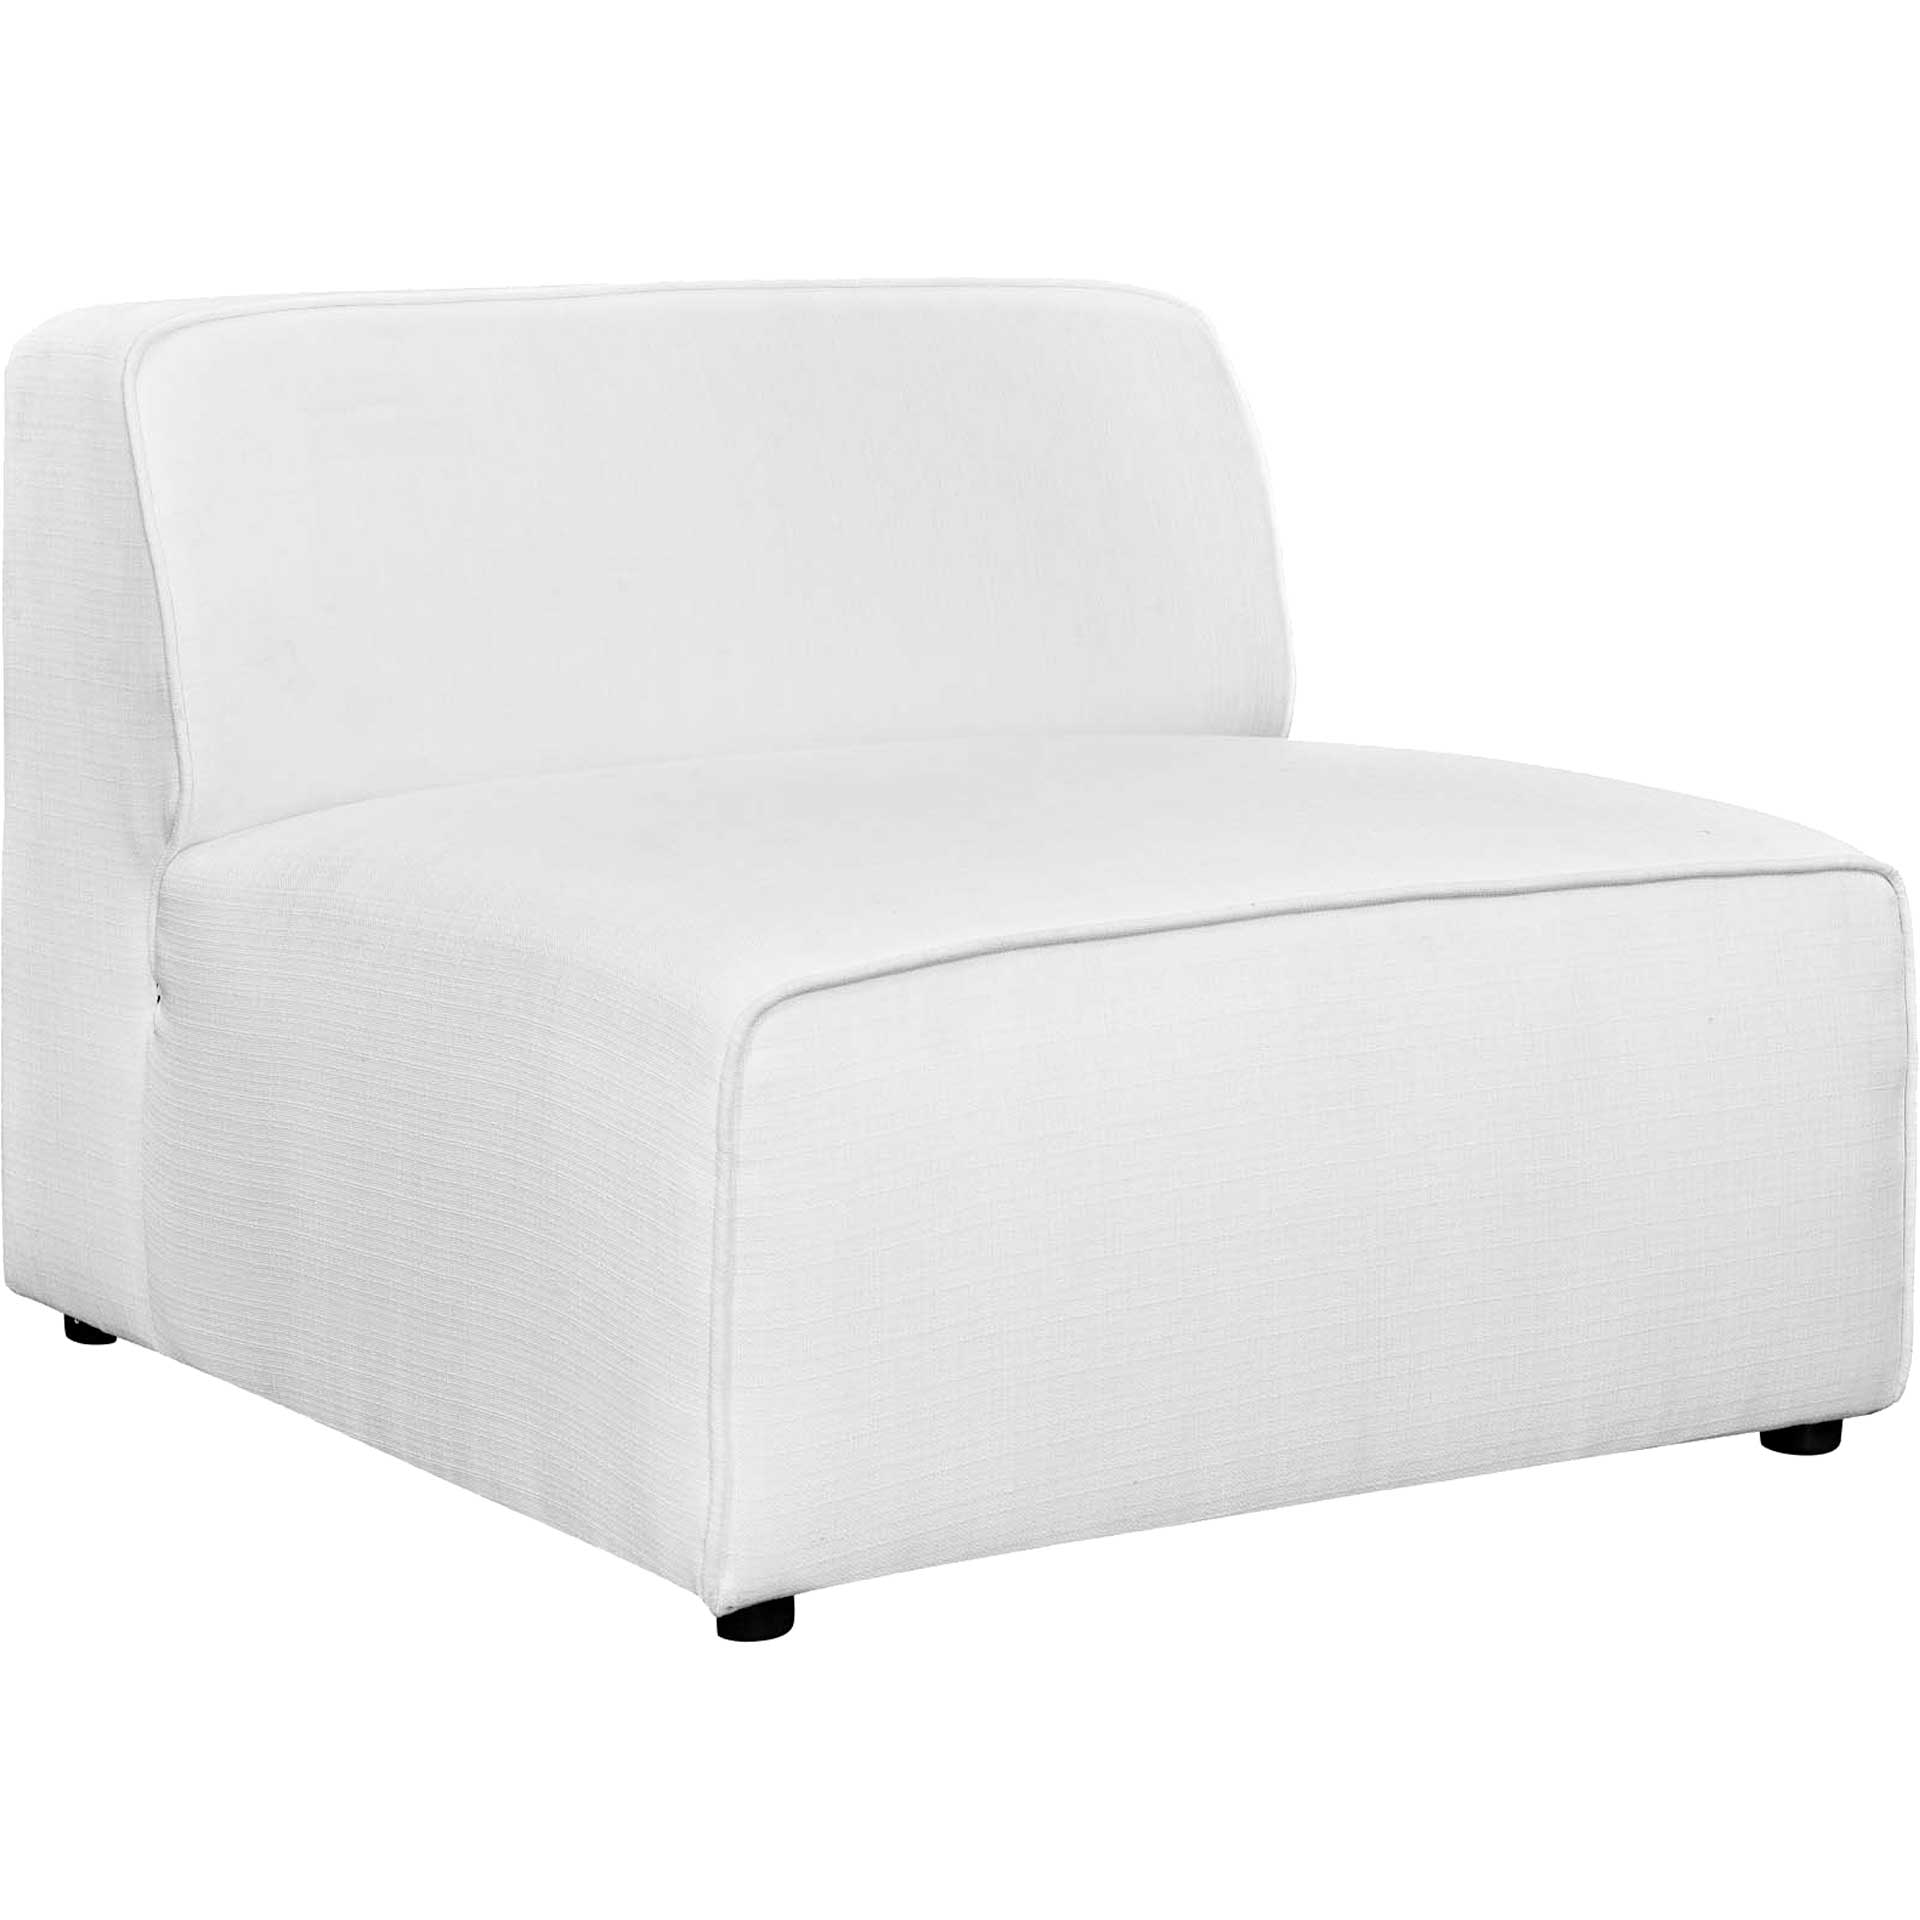 Maisie 7 Piece L-Shaped Armless Sectional Sofa White